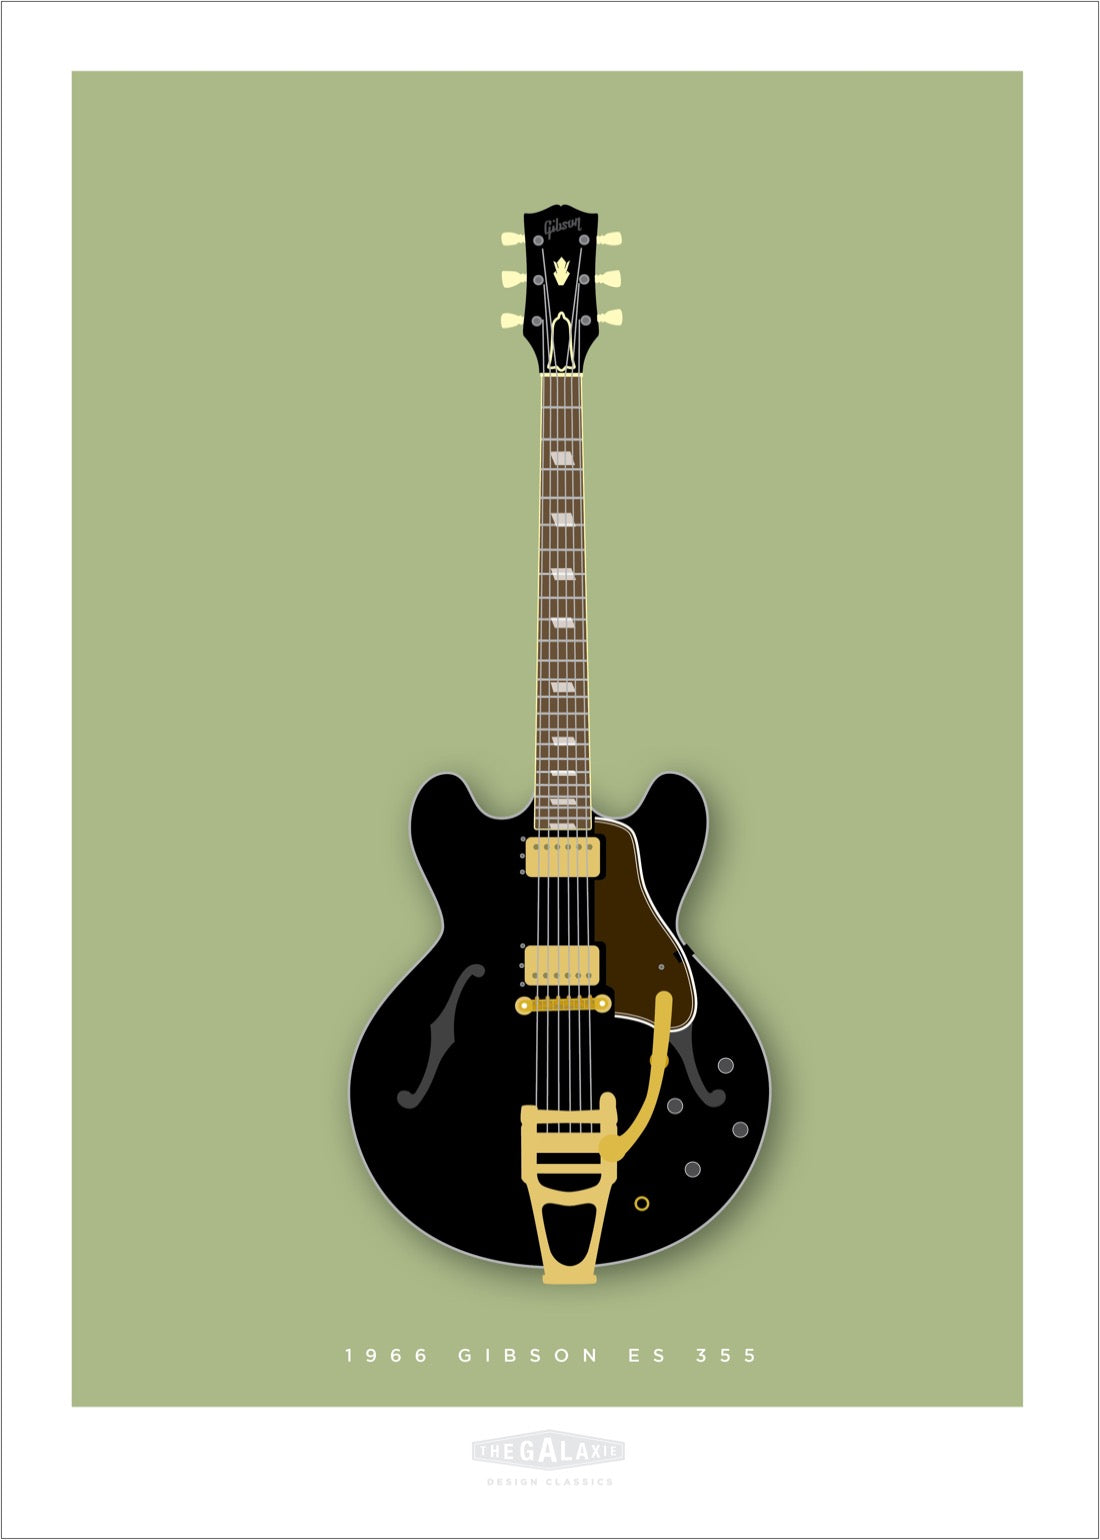 An original hand drawn poster of a black 1966 Gibson ES 355 on a green background.